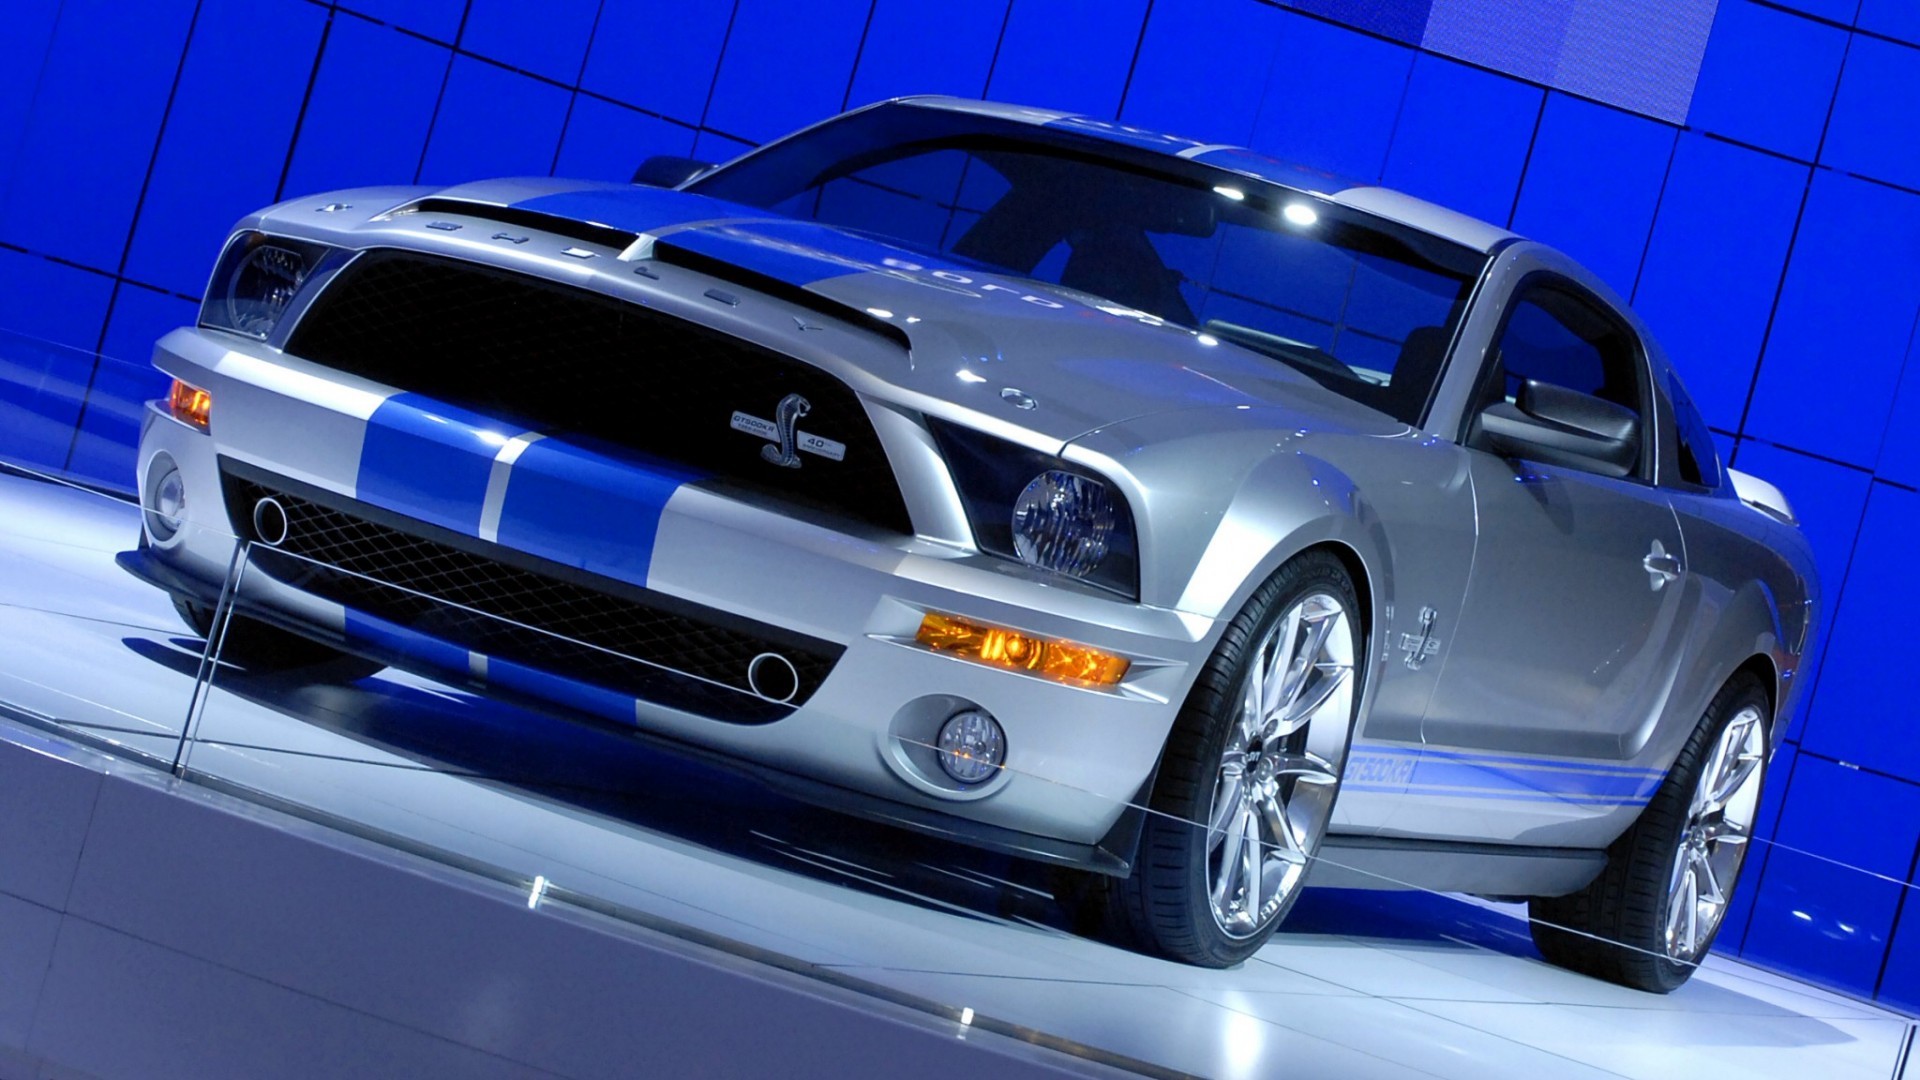 blue, Cars, Vehicles, Ford, Mustang Wallpapers HD / Desktop and Mobile